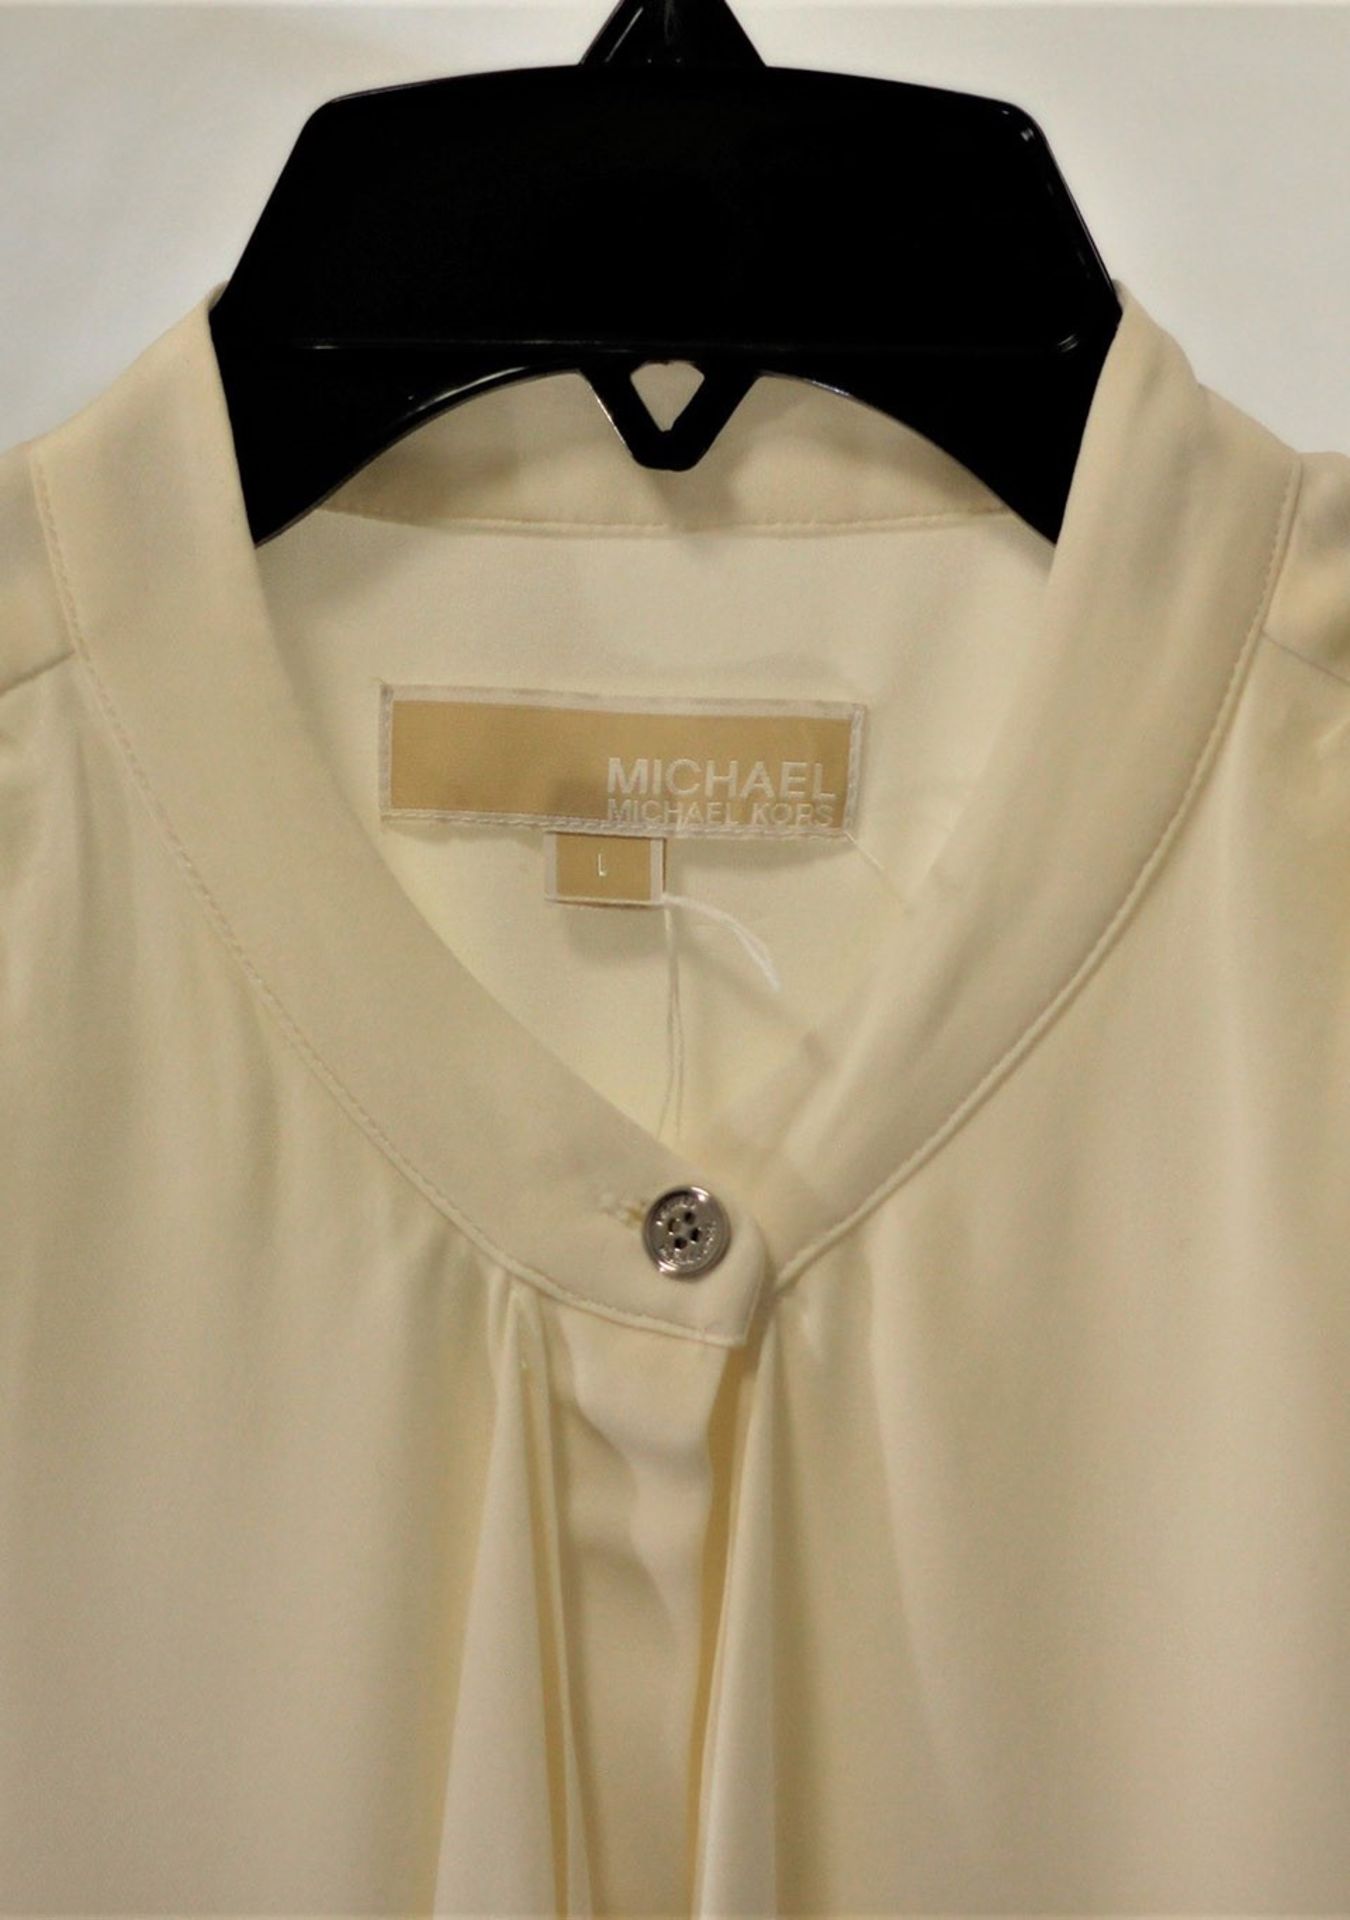 1 x Michael Kors Cream Blouse - Size: L - Material: 100% Silk - From a High End Clothing Boutique In - Image 2 of 4